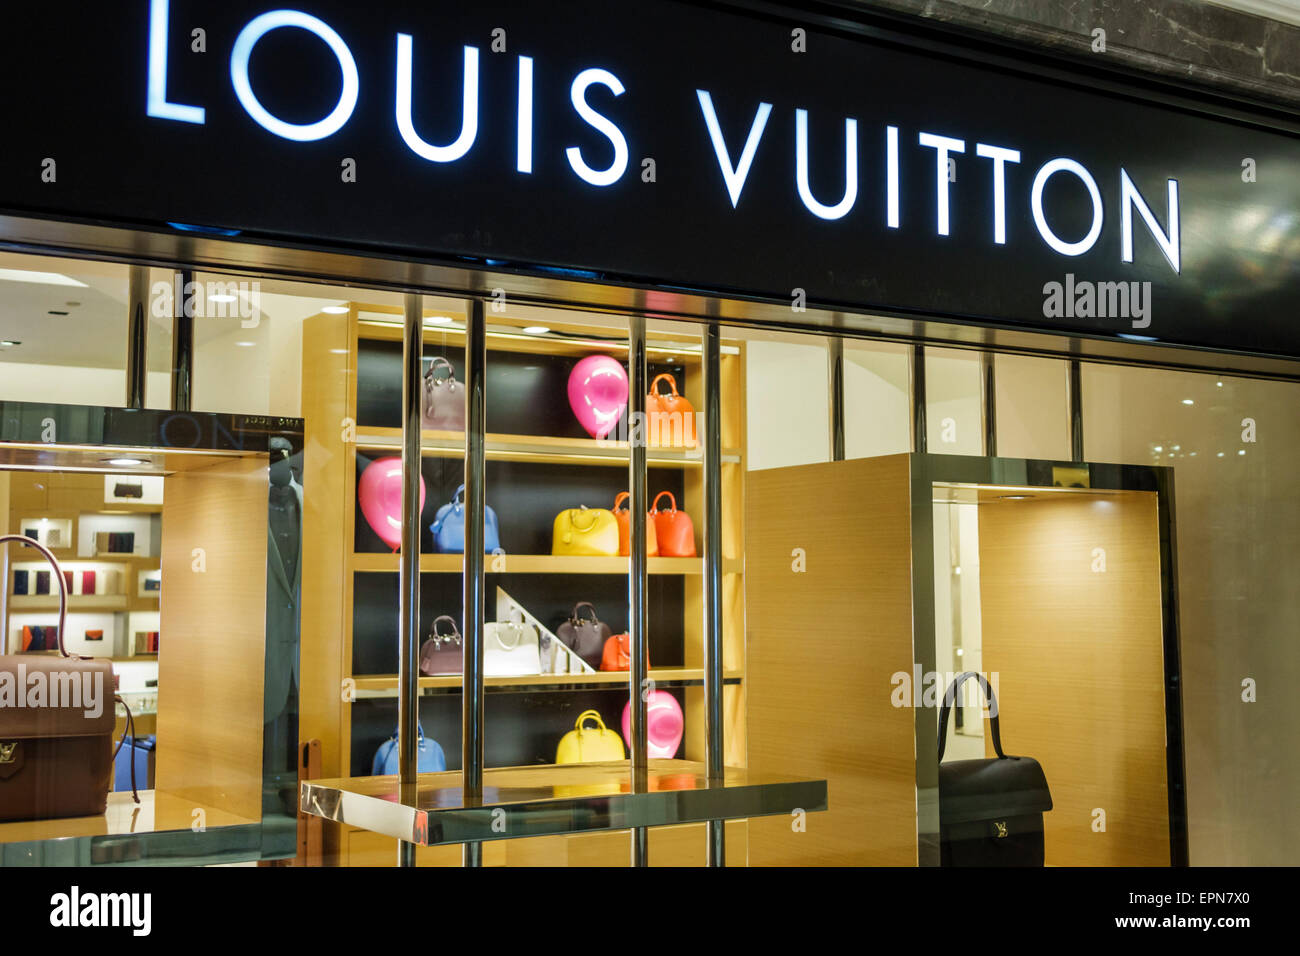 Louis Vuitton Logo on Signboard on Store Front in the Street Editorial  Stock Photo - Image of front, brand: 171828178